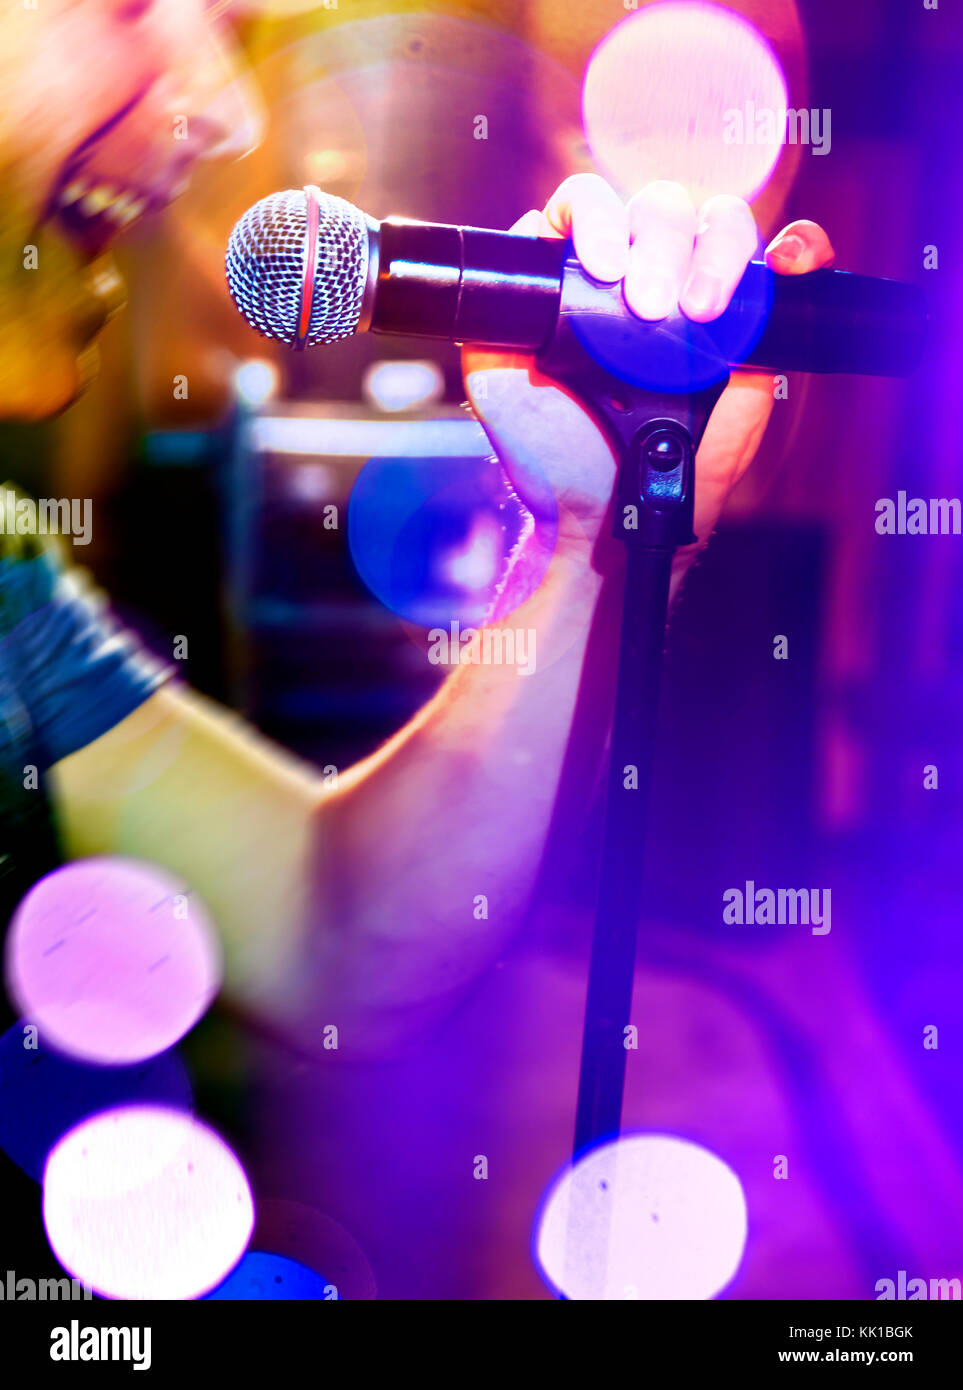 Live music background. Karaoke and microphone concept. Stage lights and  singer Stock Photo - Alamy